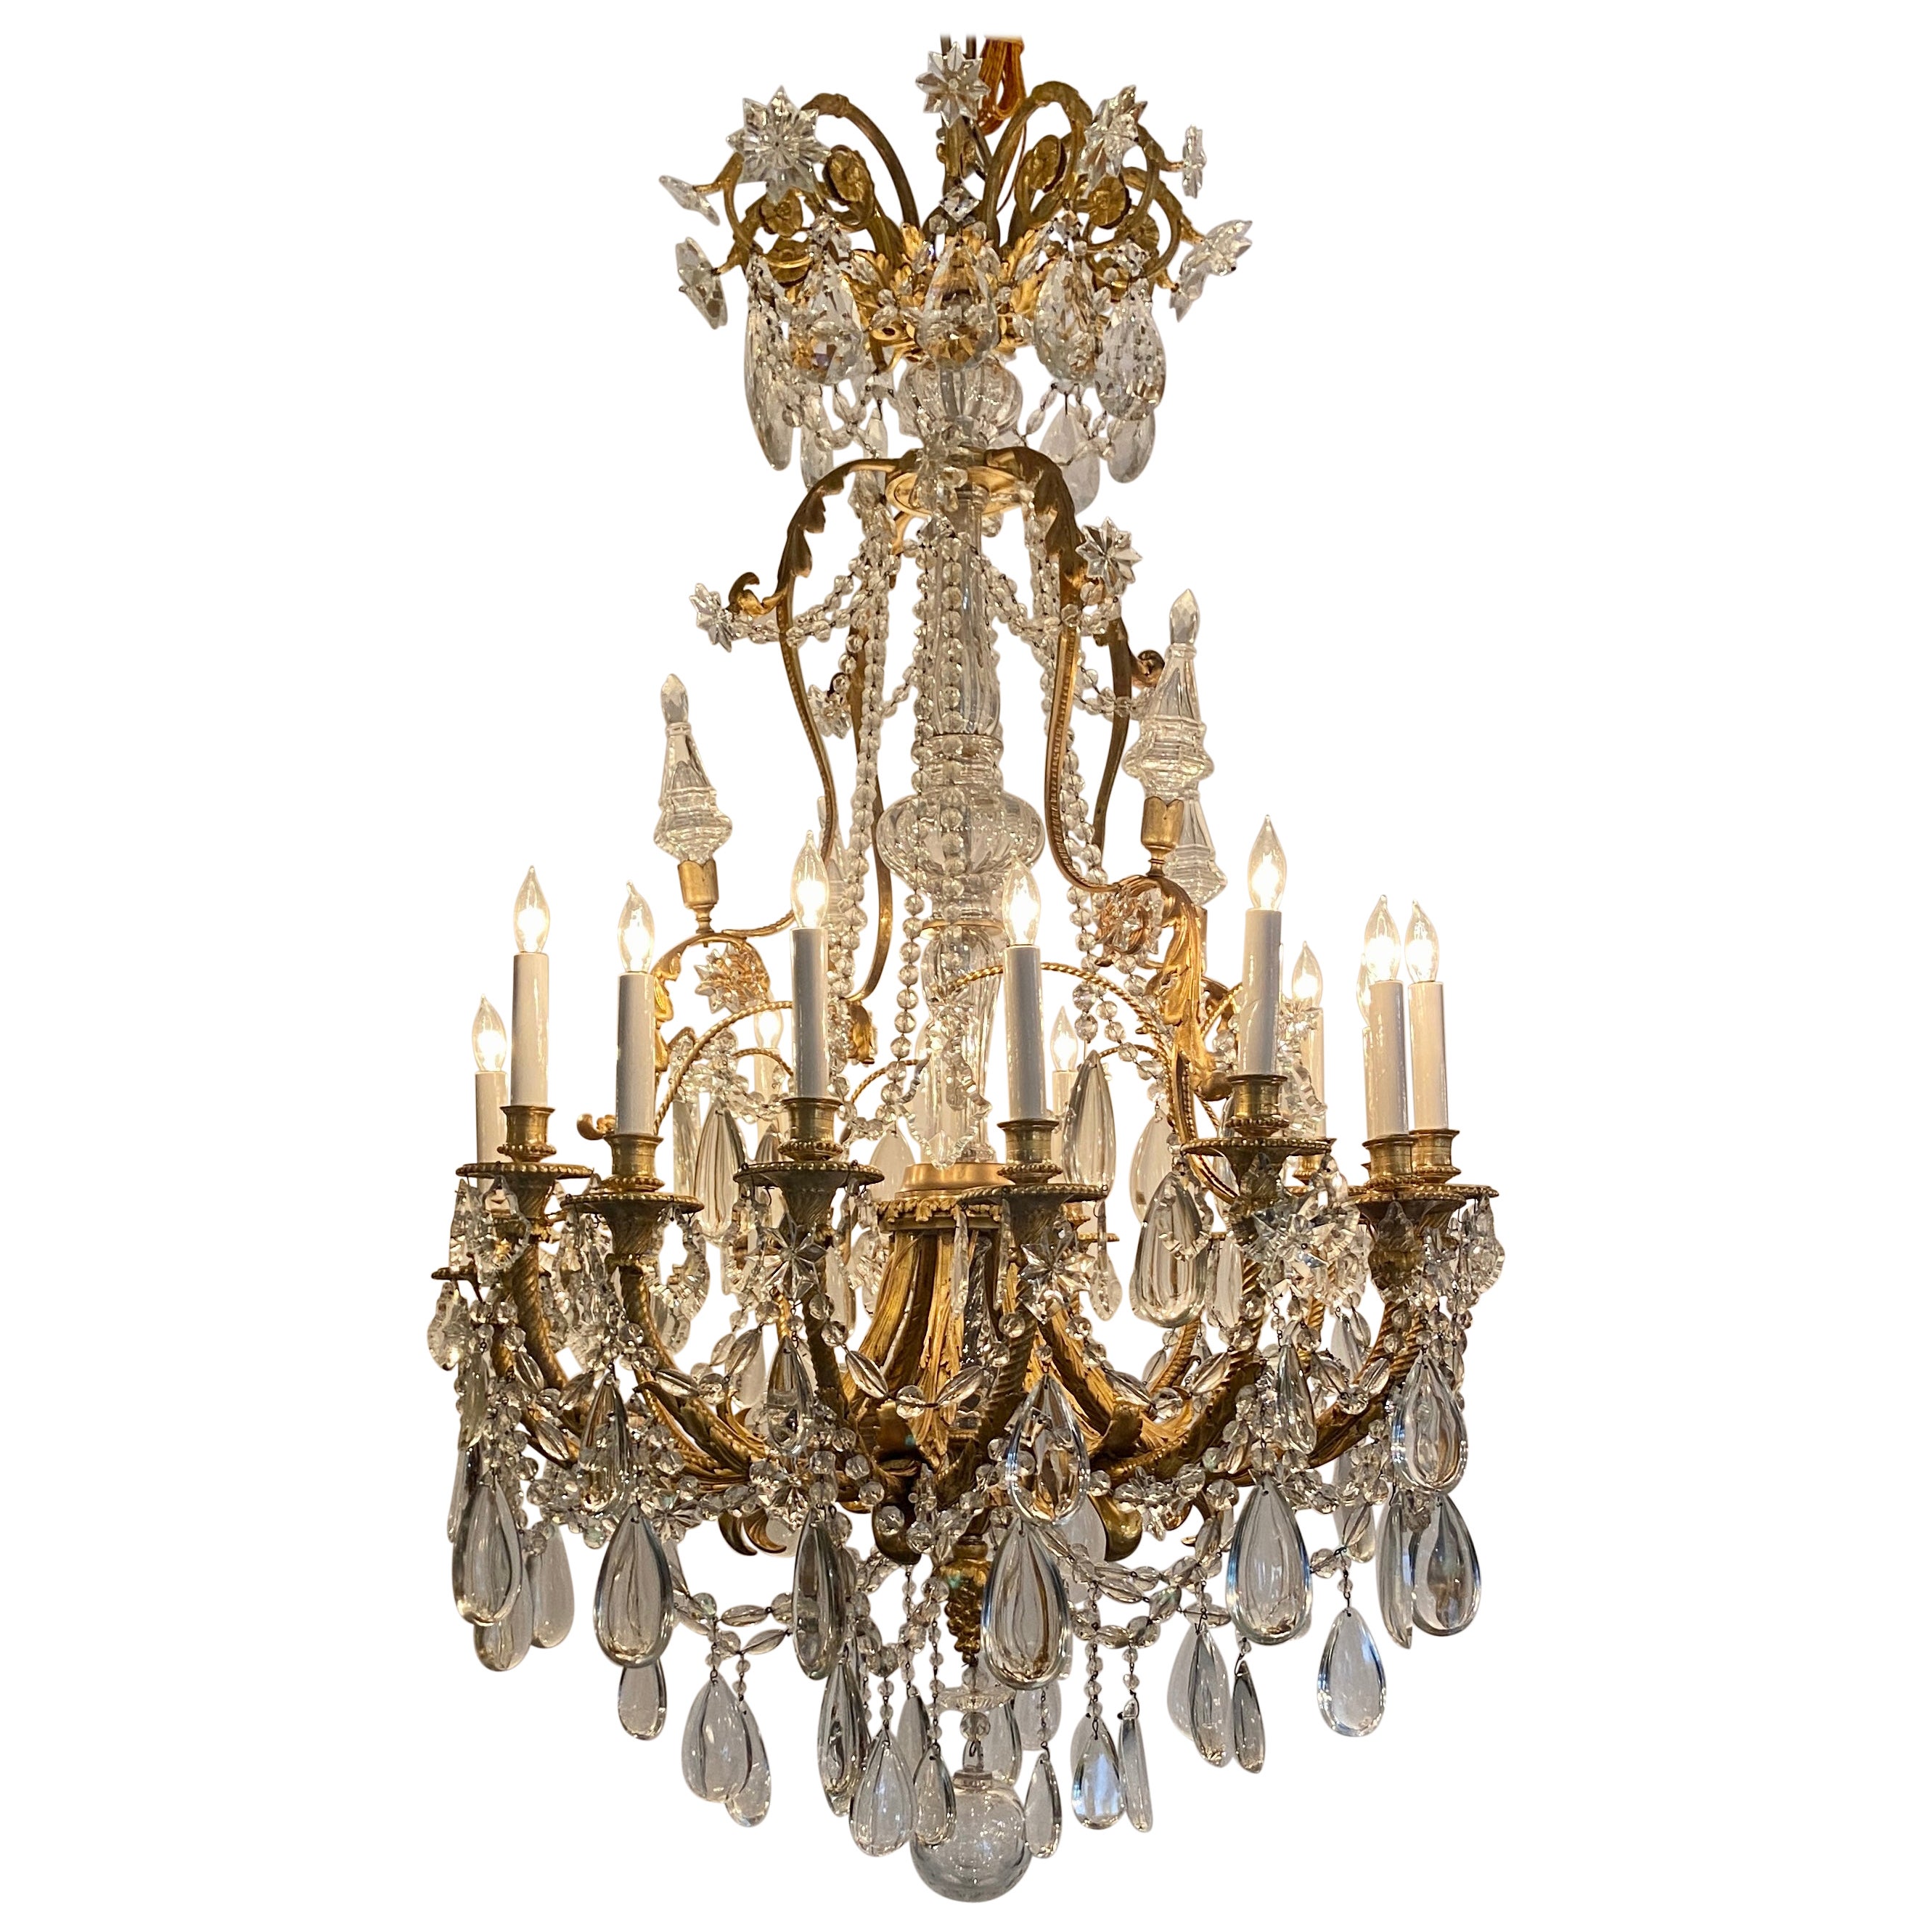 Antique French Ormolu Bronze and Baccarat Crystal Chandelier, Circa 1860 For Sale